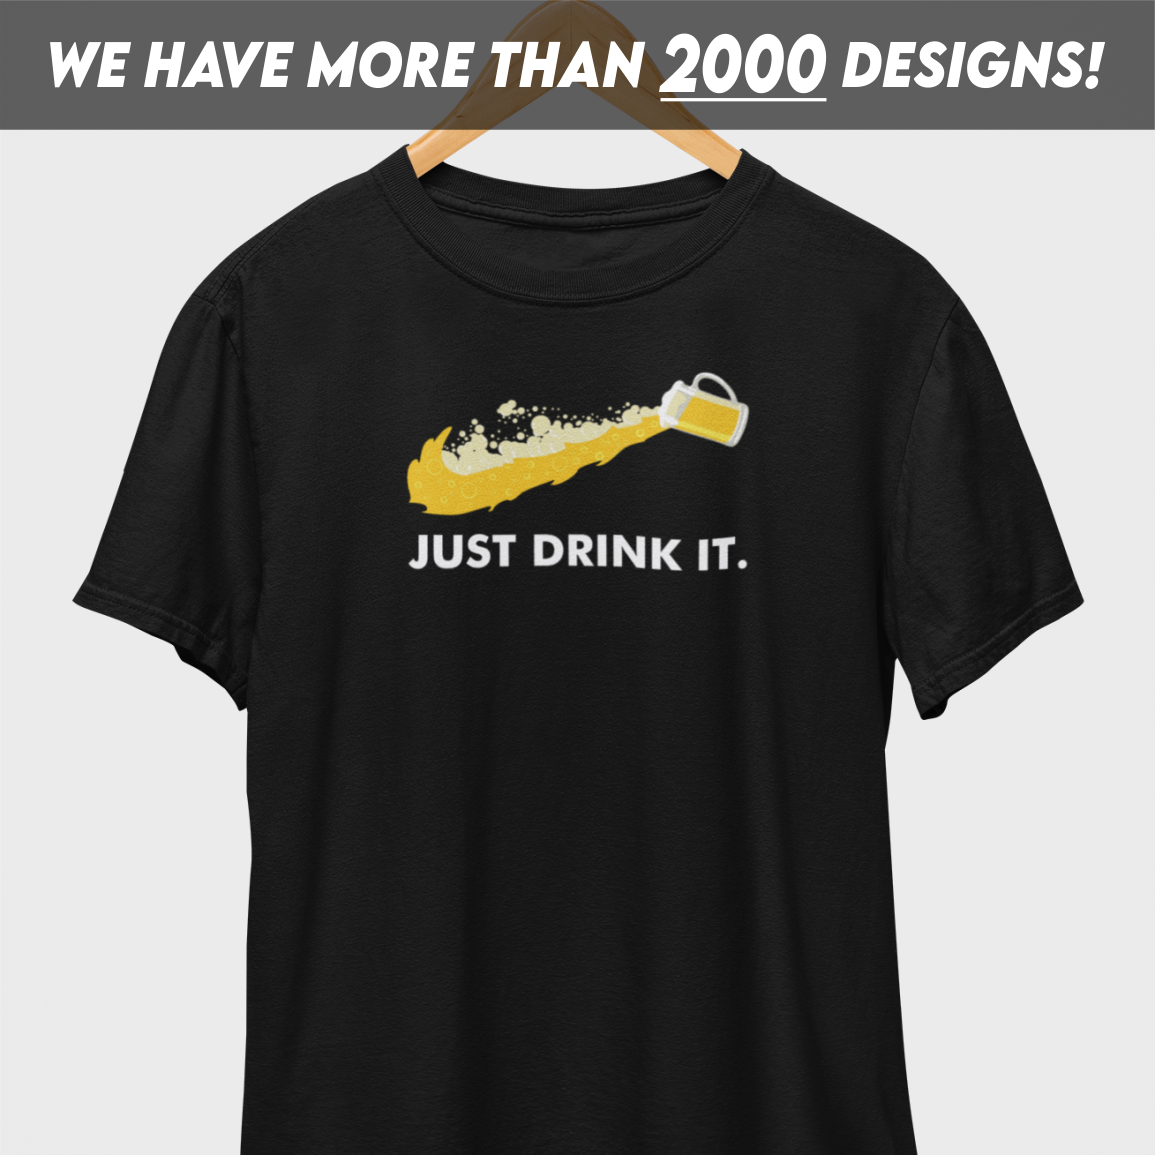 Just Drink It T-Shirt